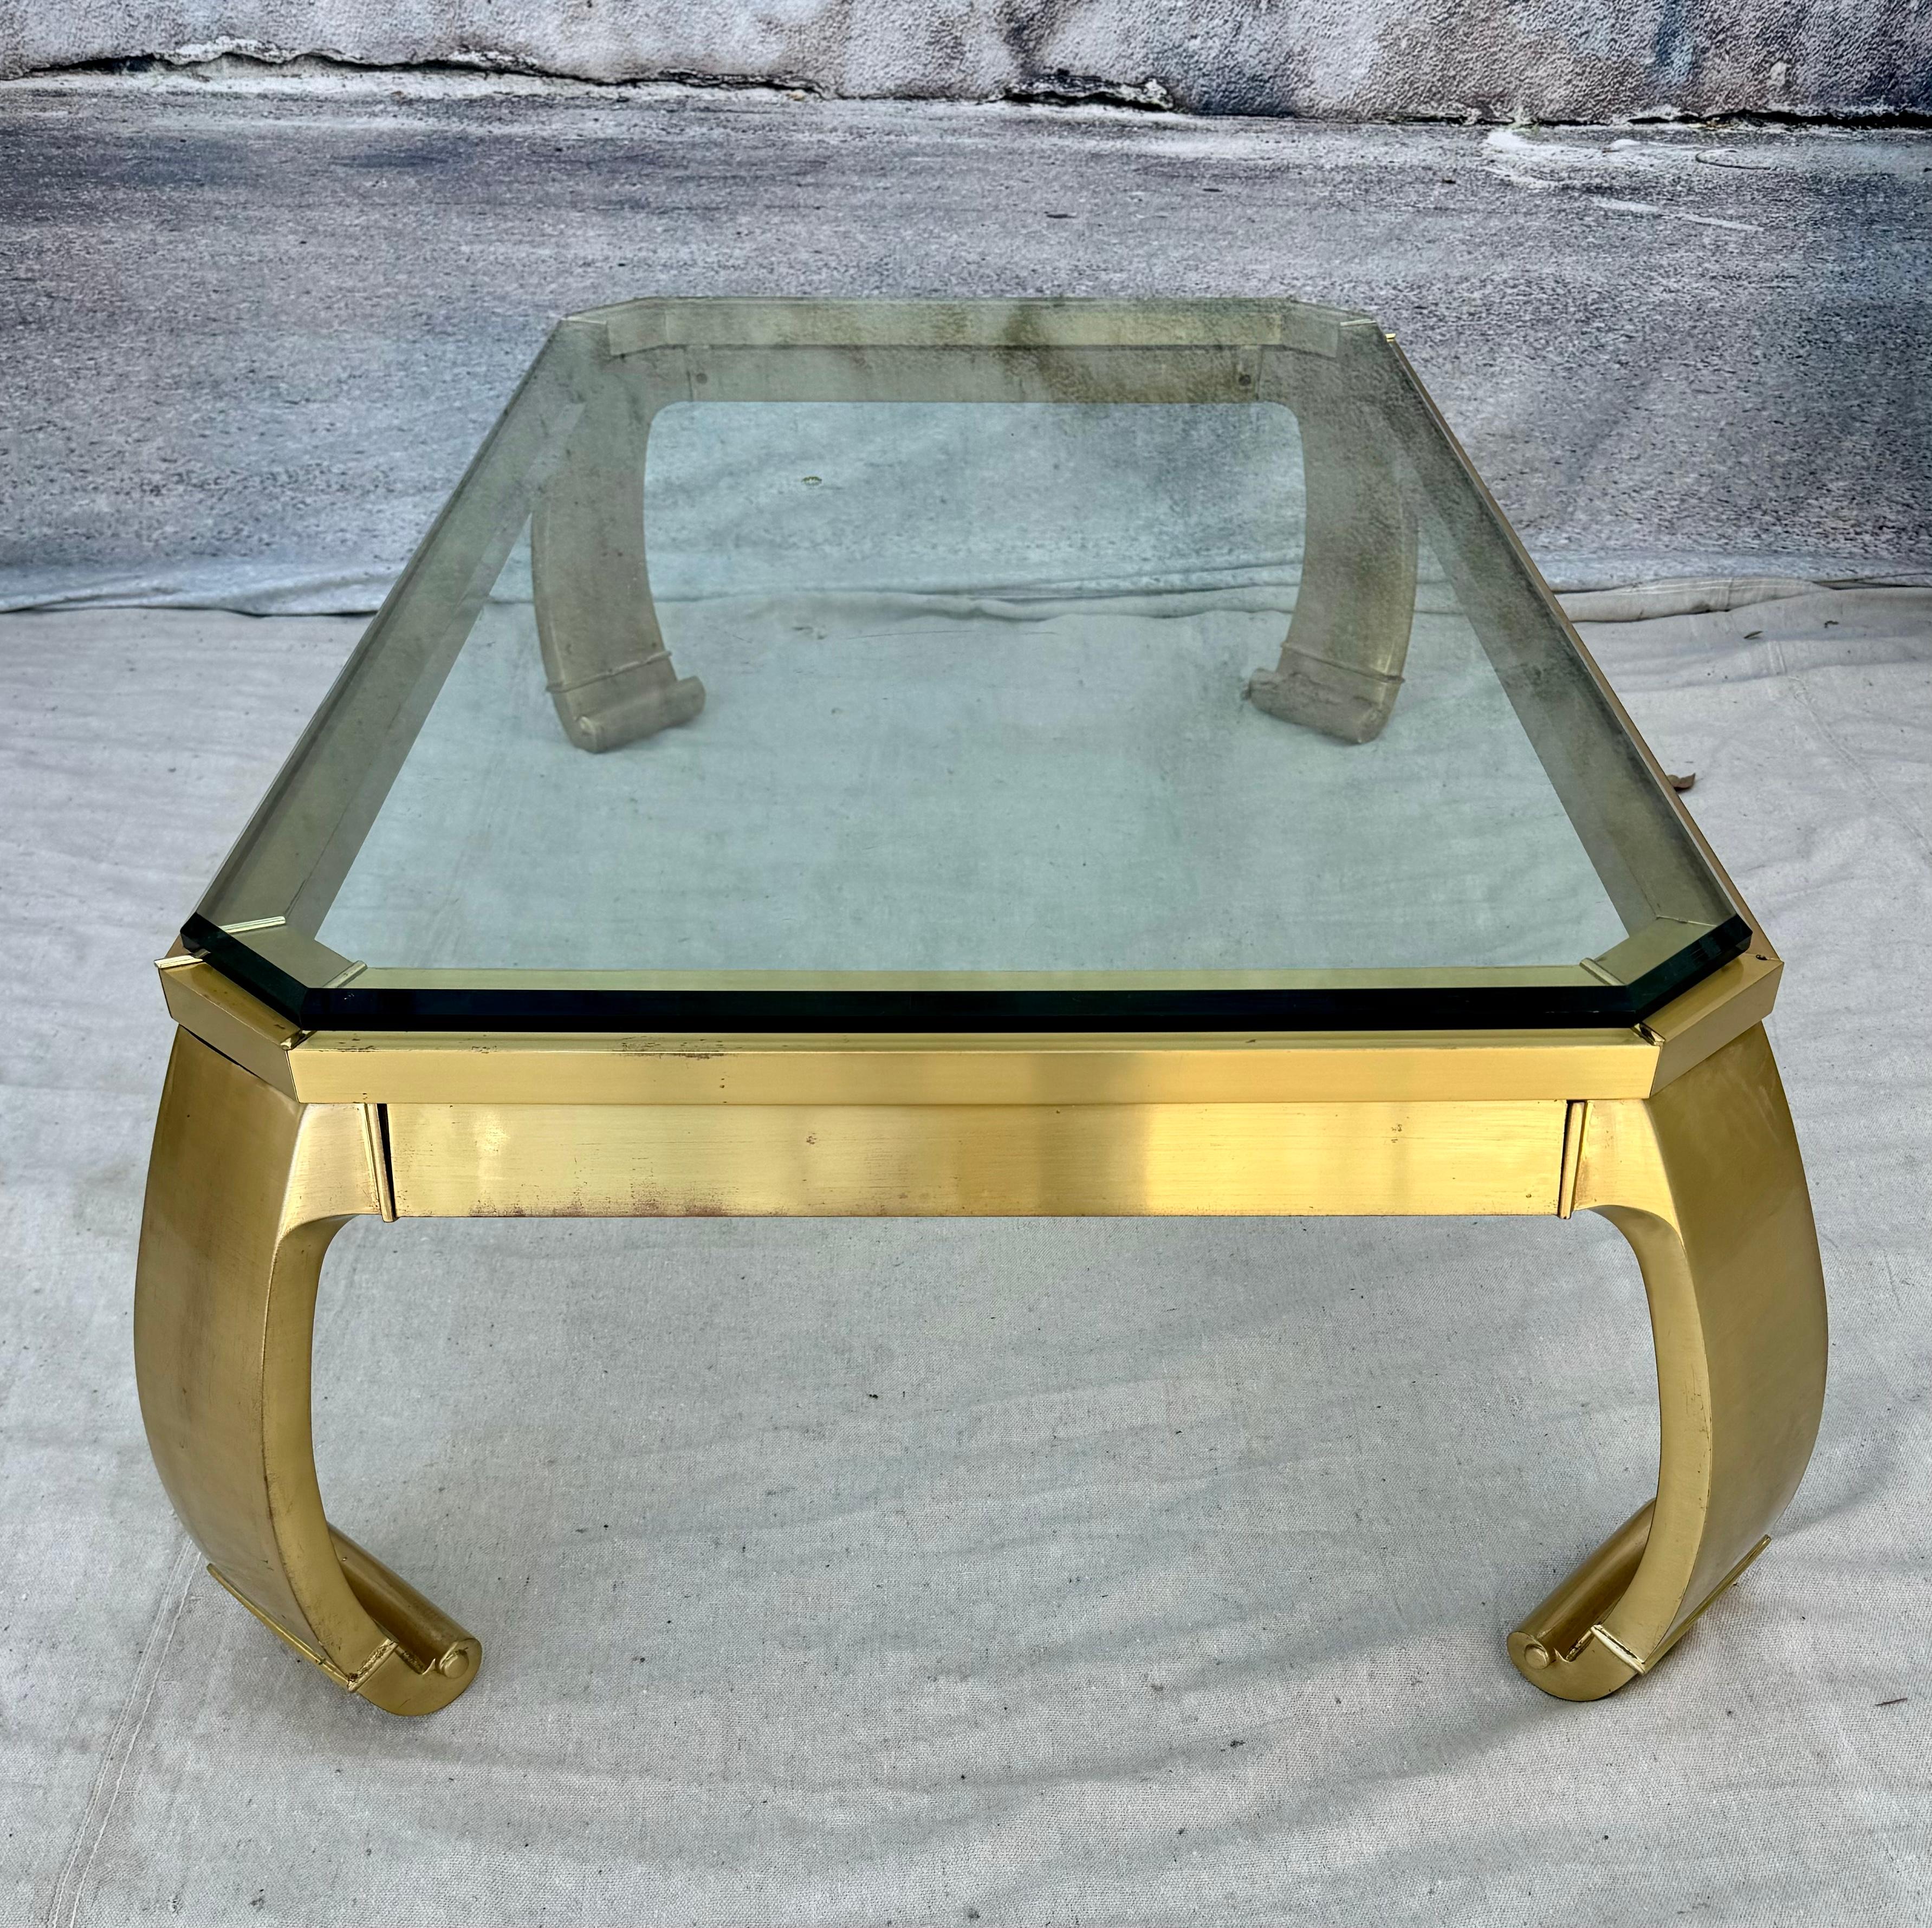 This 1960's vintage rectangular Asian coffee table is in the iconic Mastercraft style, and features a brass frame with rounded legs with scrolled toes. Heavy beveled glass sits on top. This elegant coffee table radiates grace and sophistication.